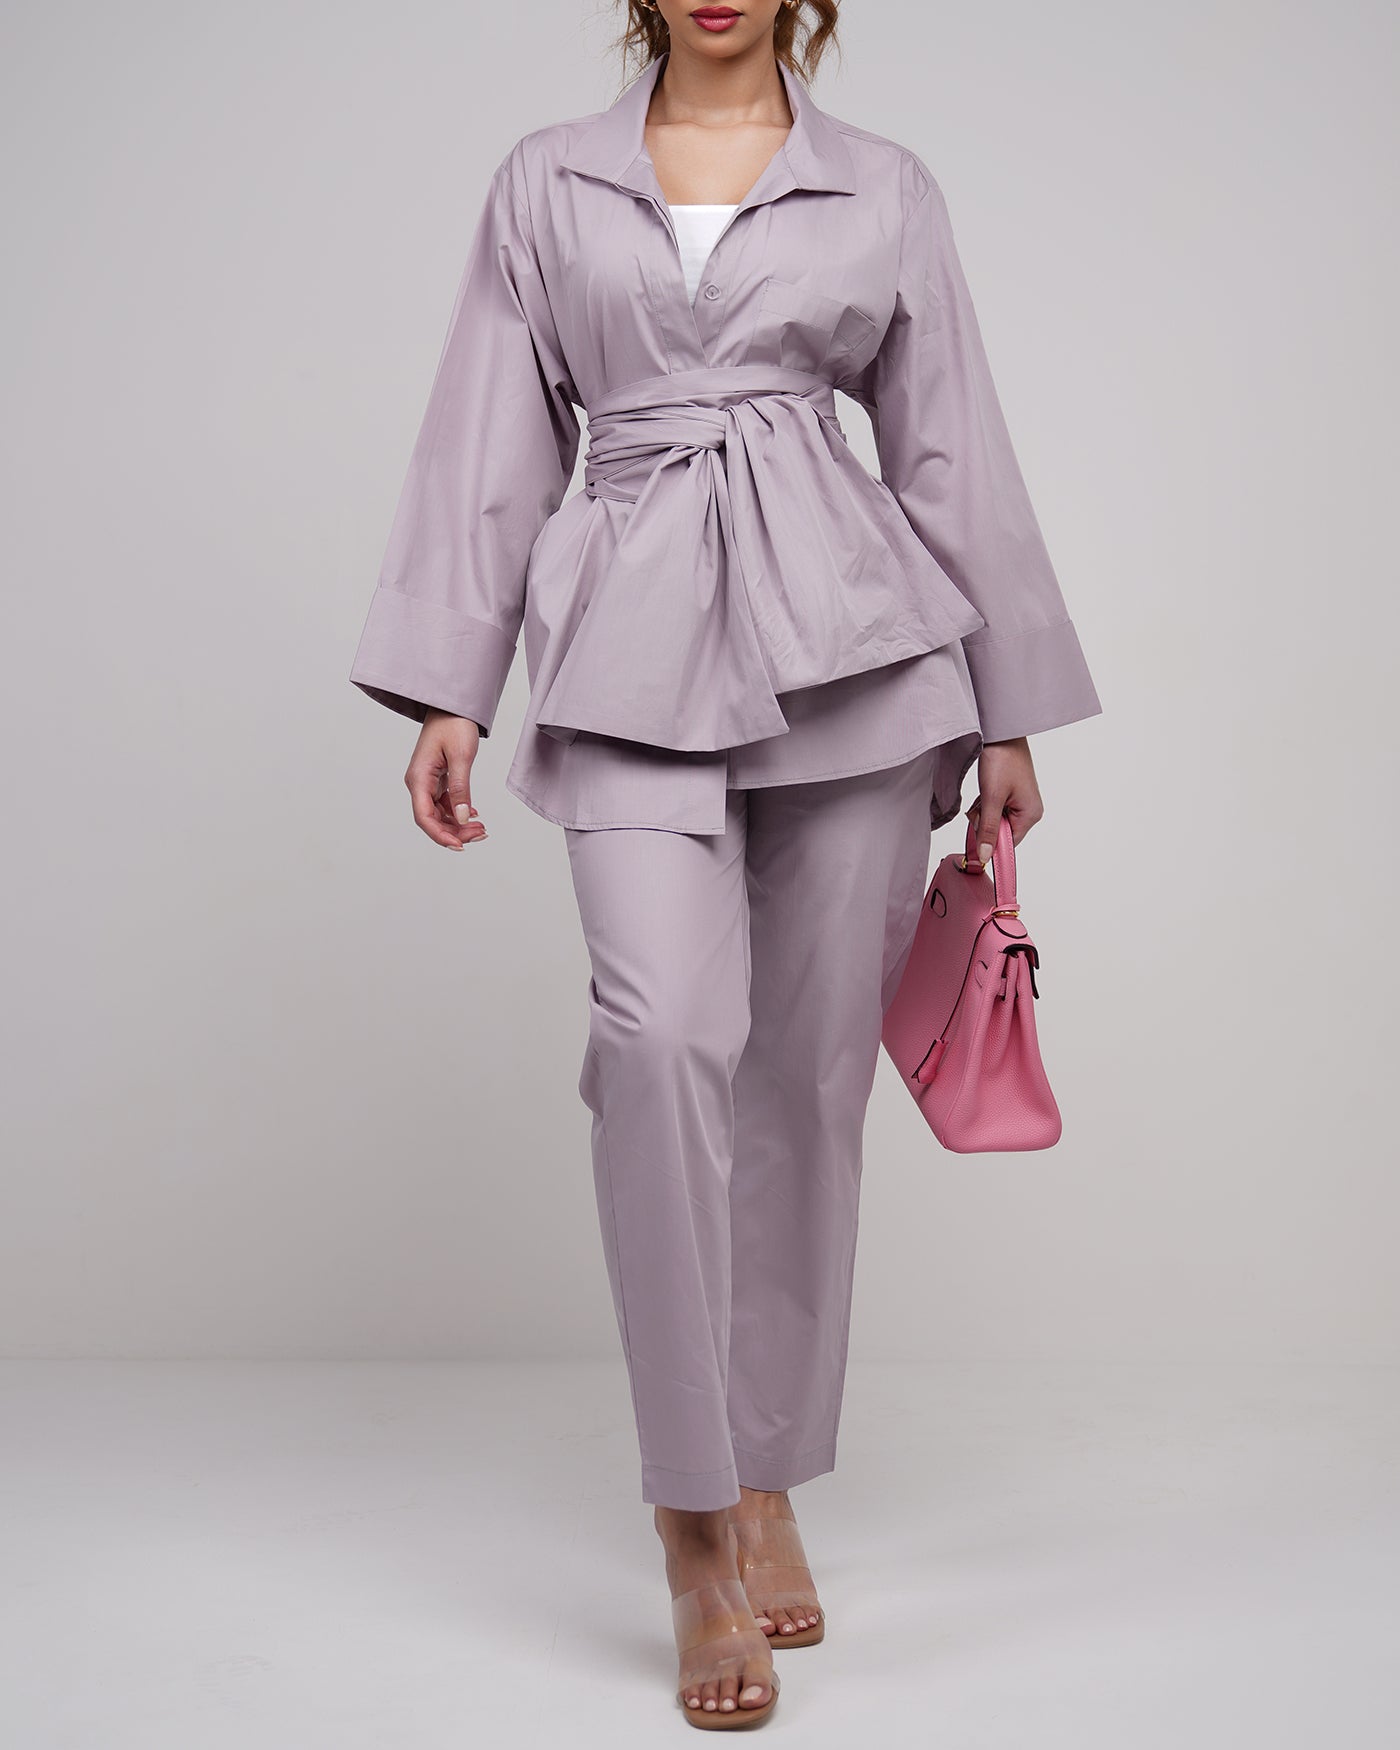 Pink lavender belted oversized shirt with straight cut trousers